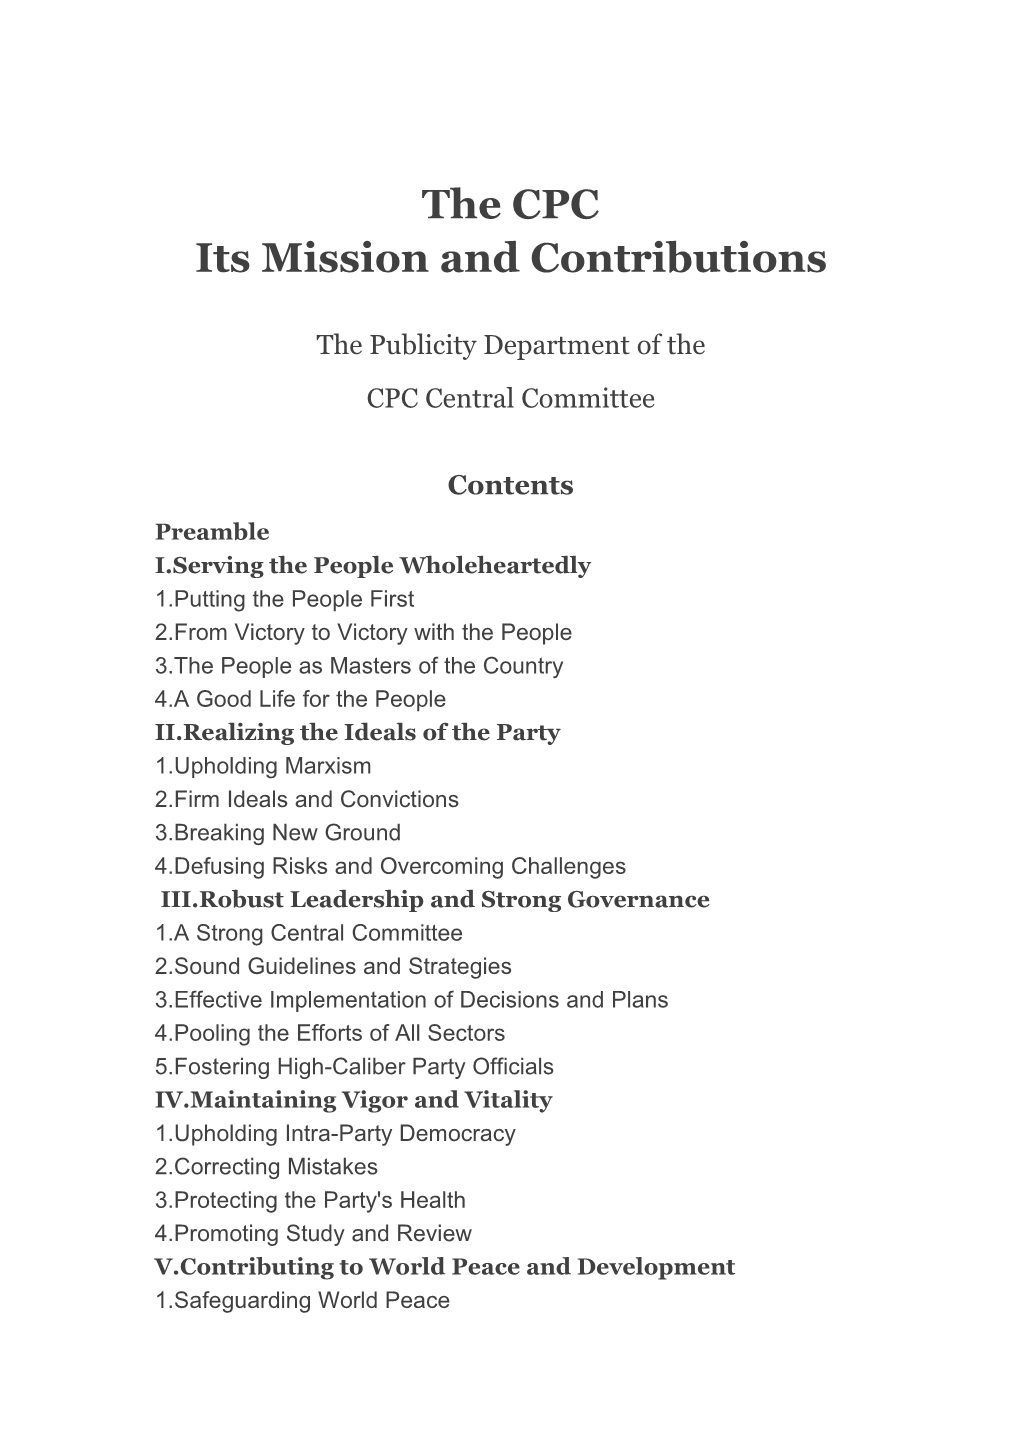 The CPC Its Mission and Contributions